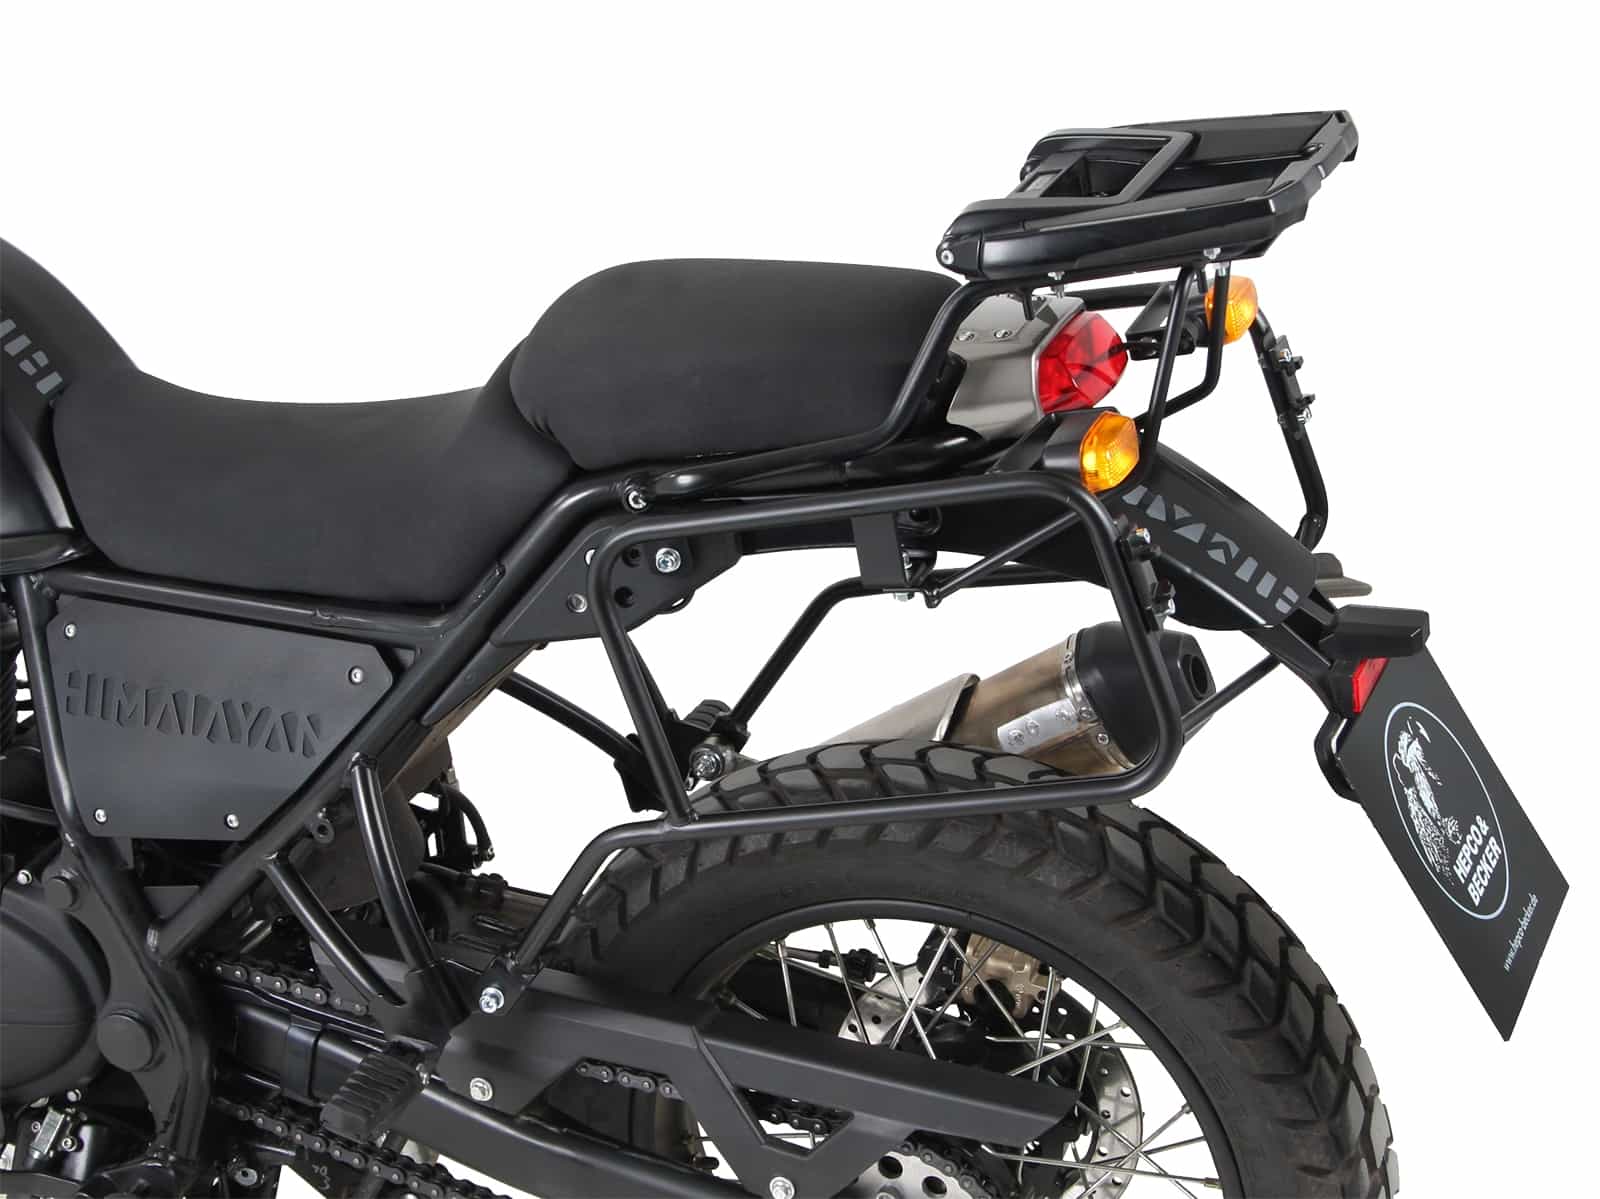 Alurack top case carrier black for combination with original rear rack for Royal Enfield Himalayan (2018-2020)